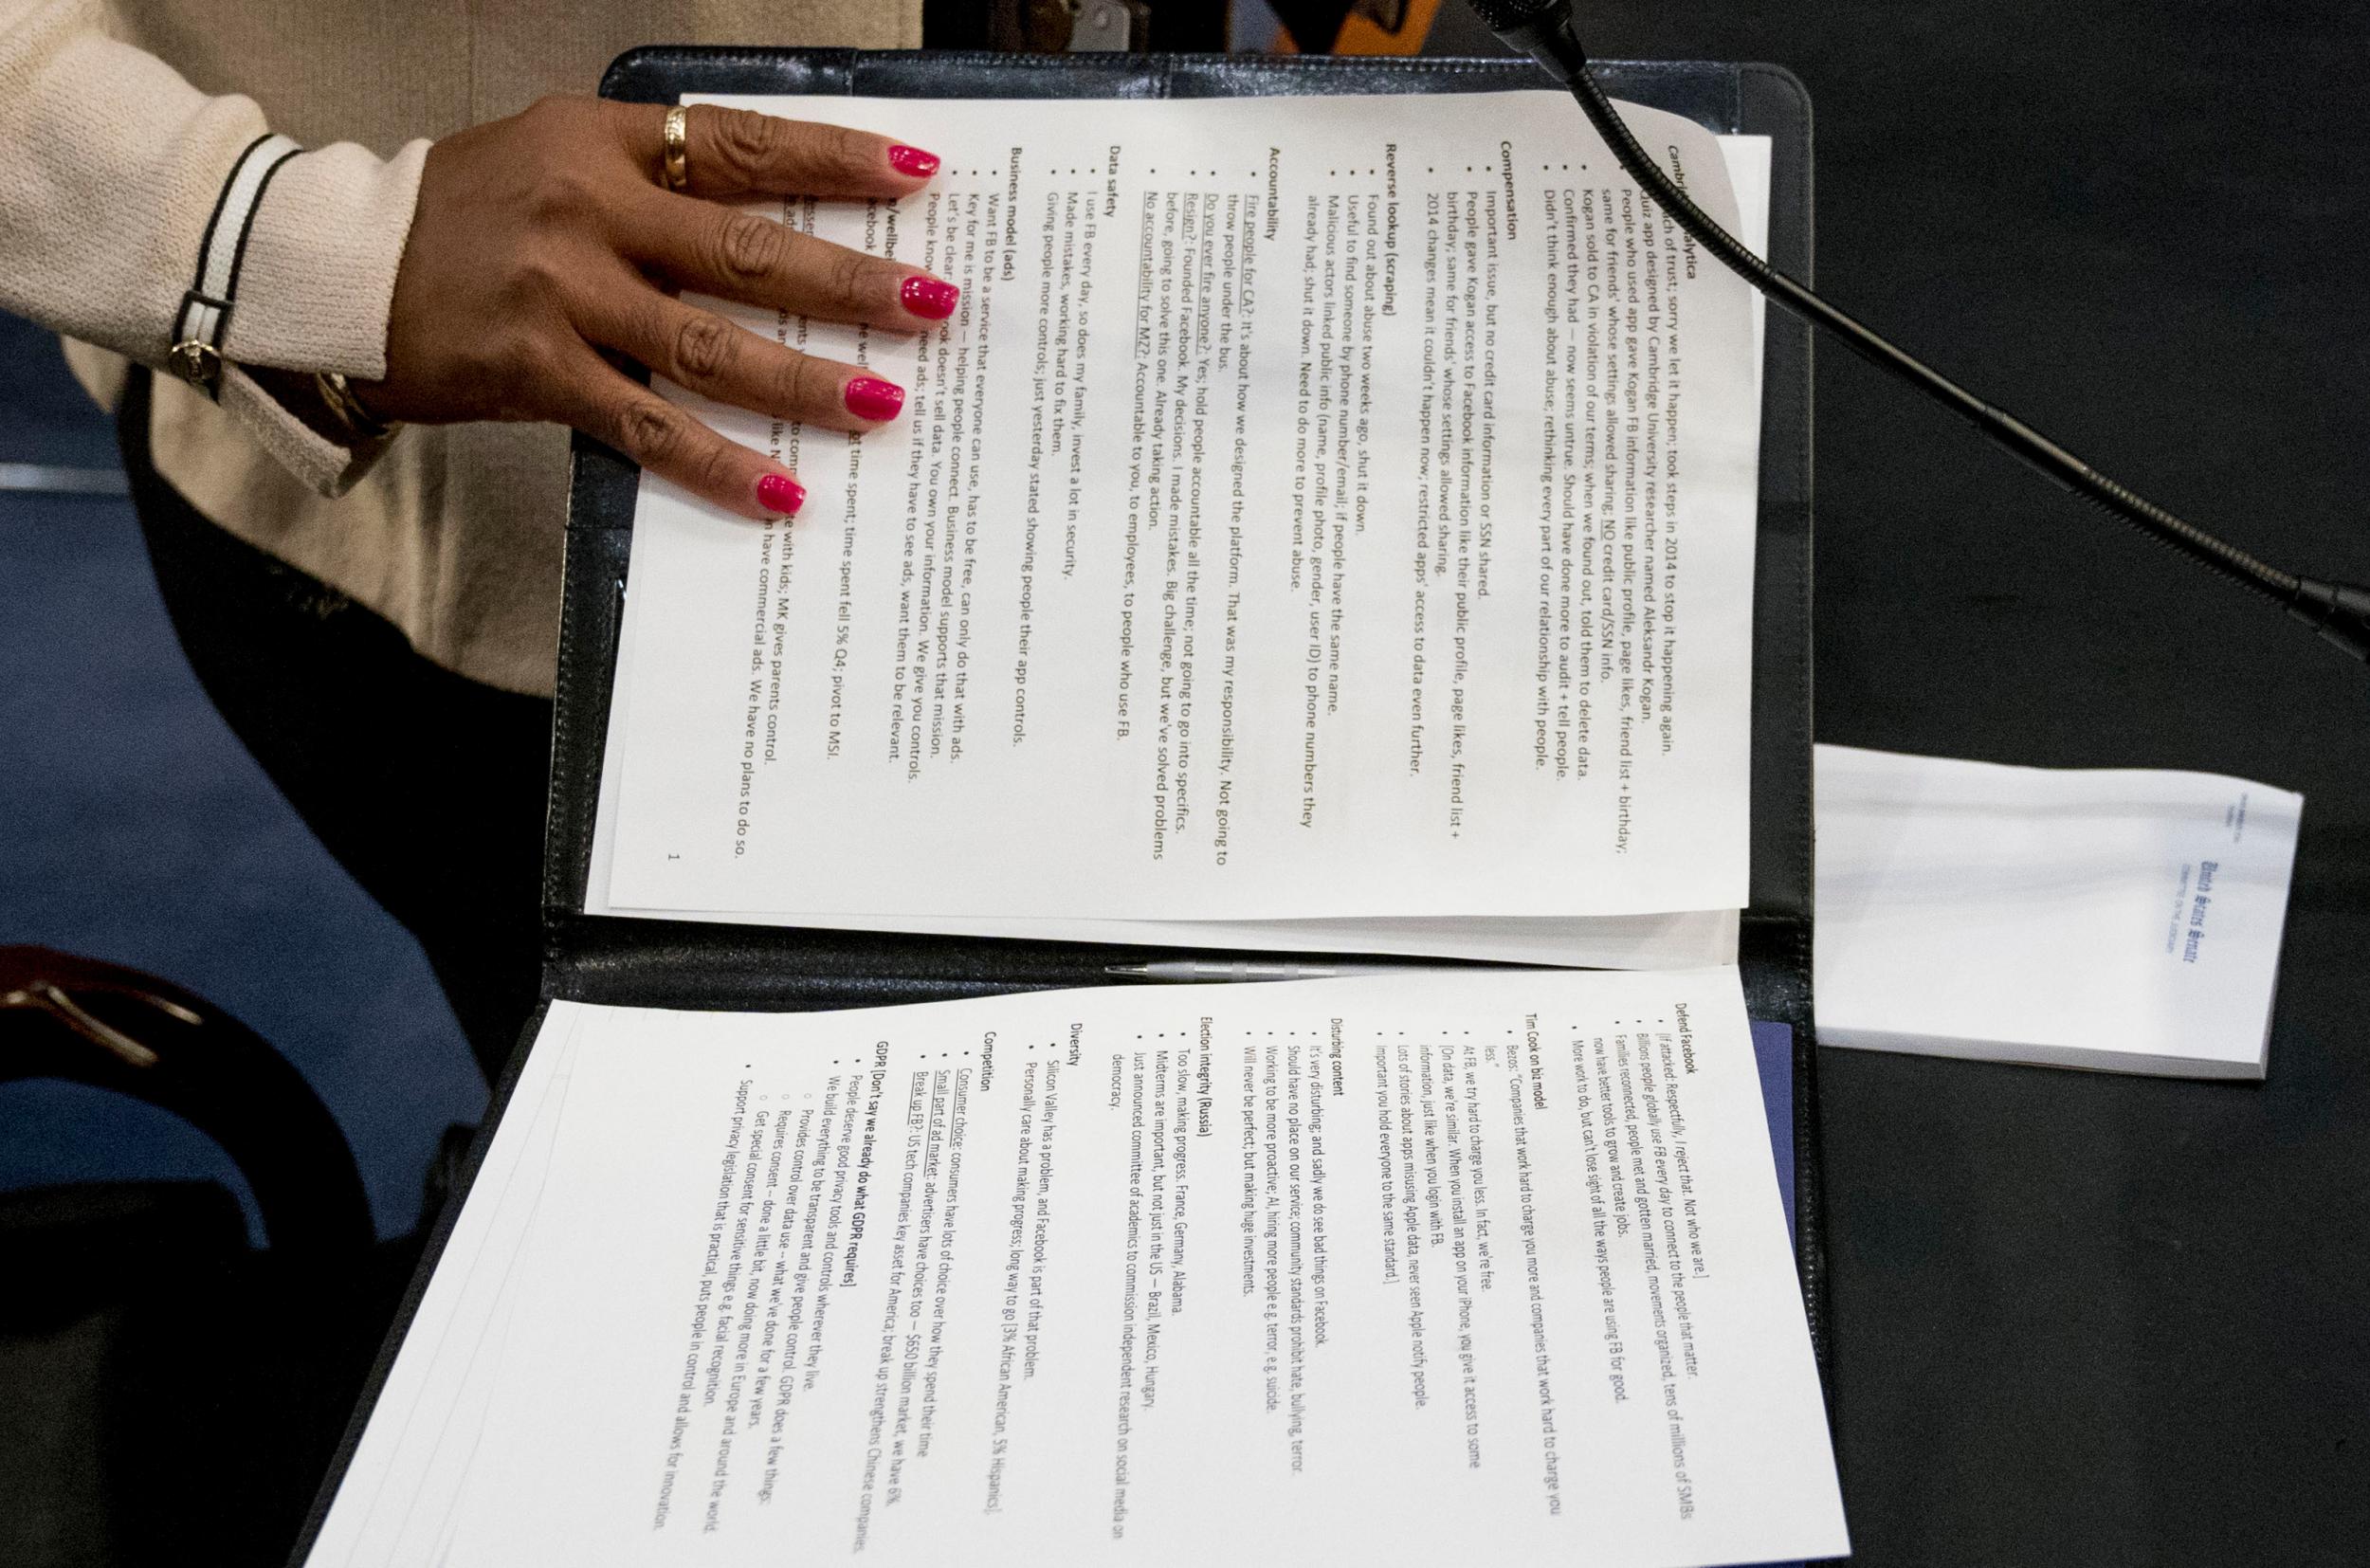 An aide to Facebook CEO Mark Zuckerberg closes a binder of notes left on the table as Zuckerberg takes a short break from testifying before a joint hearing of the Commerce and Judiciary Committees on Capitol Hill in Washington, Tuesday, April 10, 2018